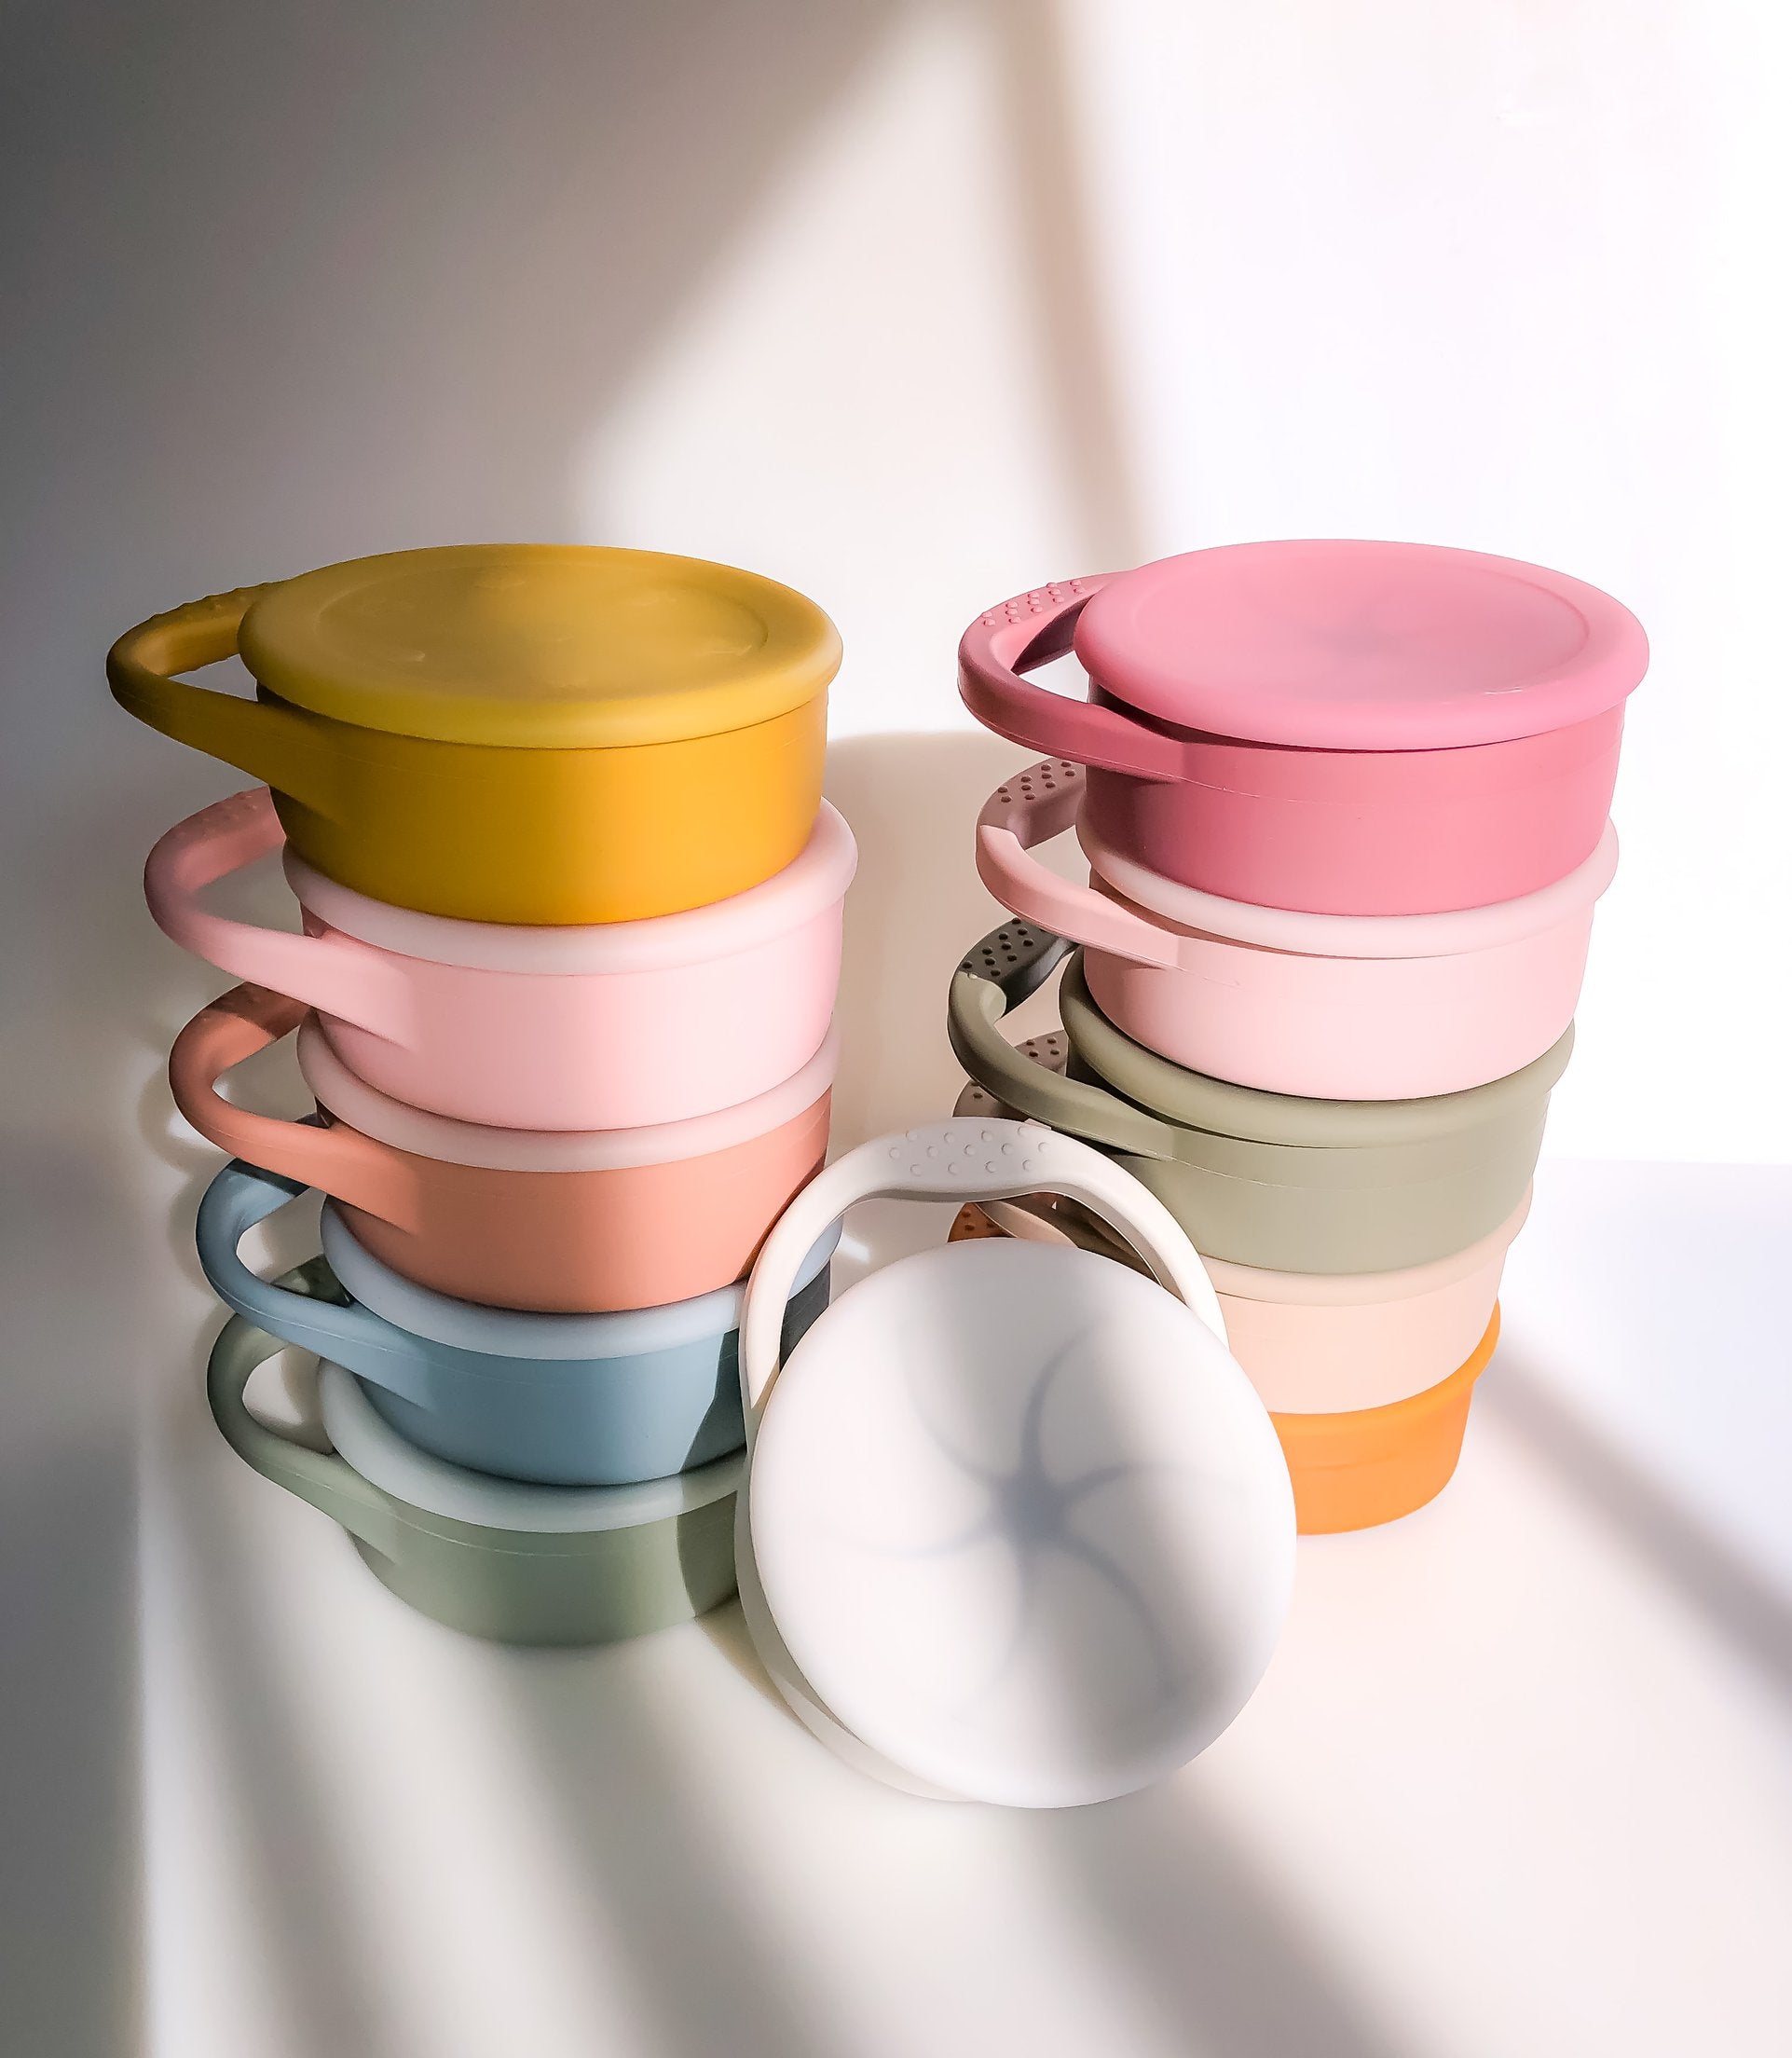 Collapsible Baby Snack Cup - Beba Canada